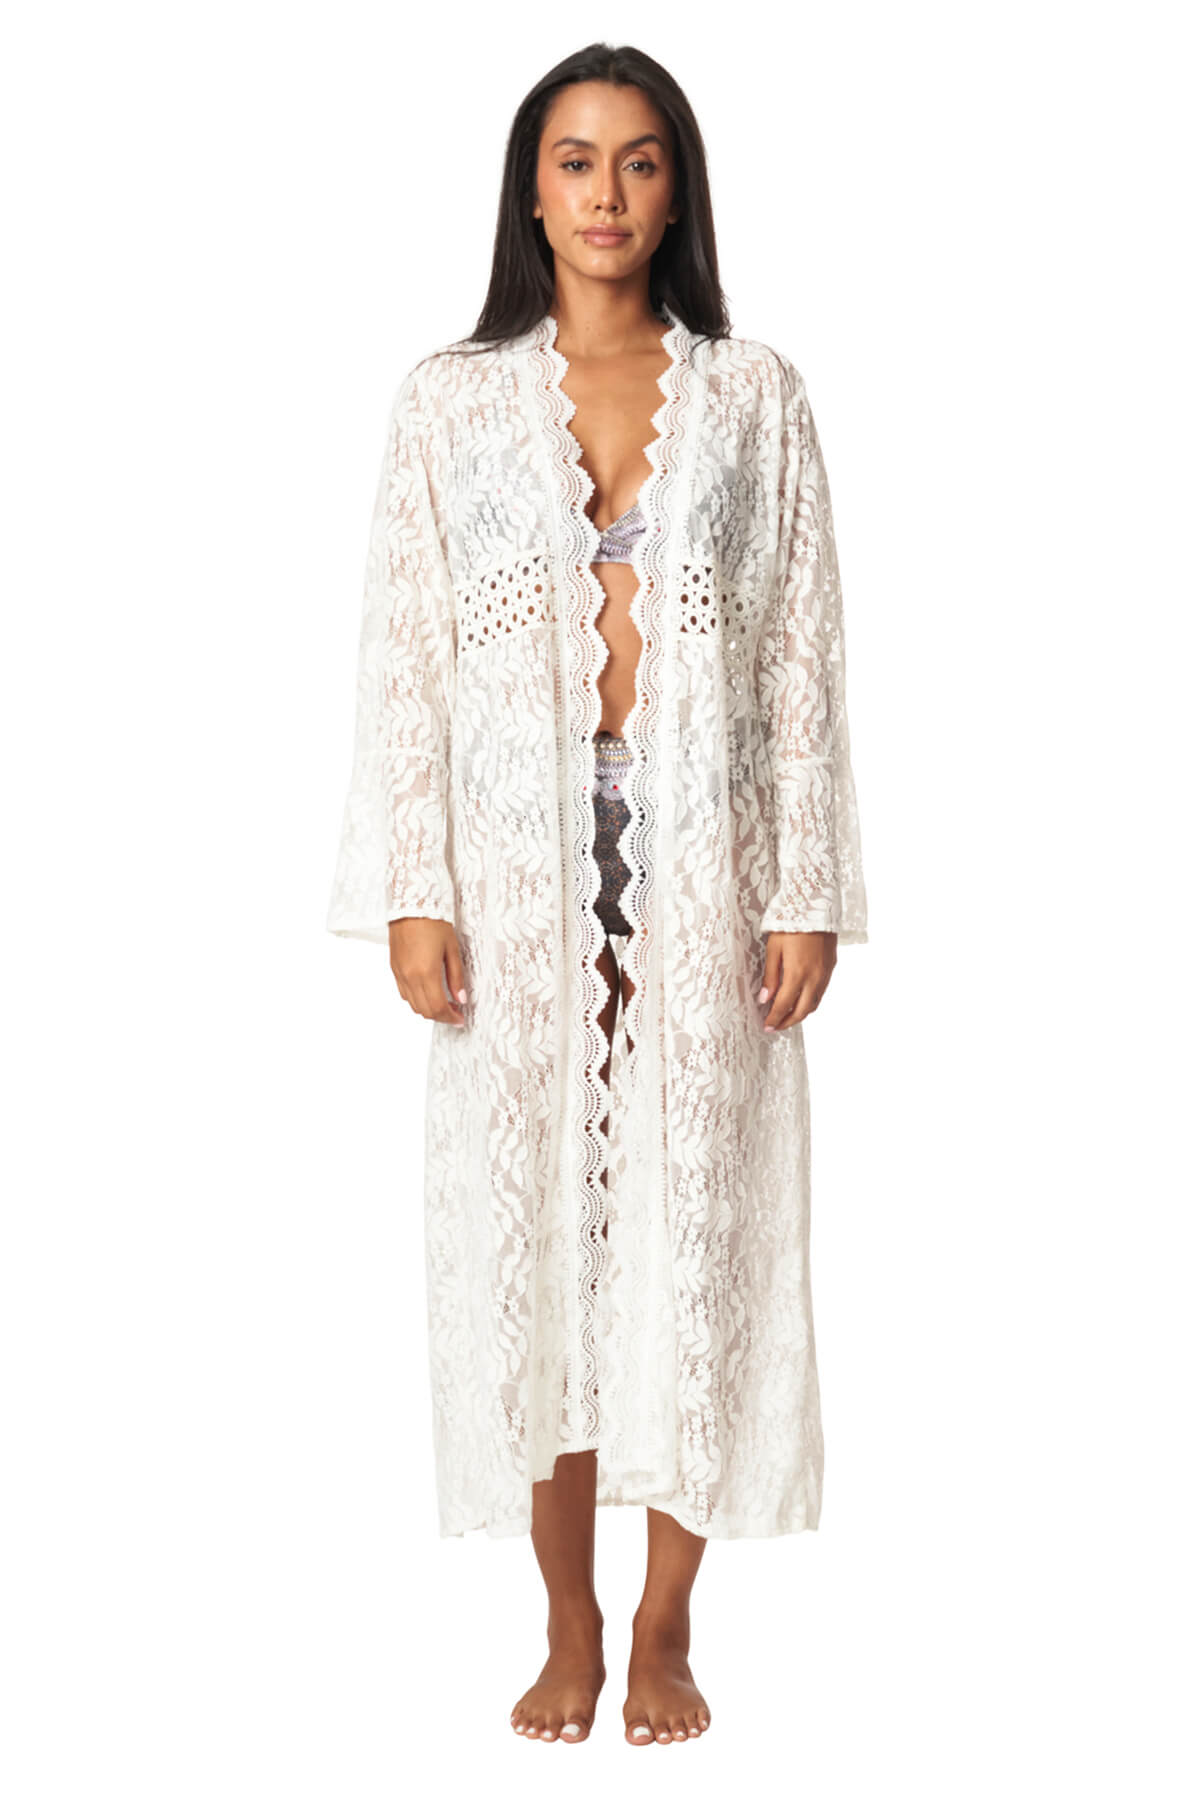 Layla Lace Cover Up Duster